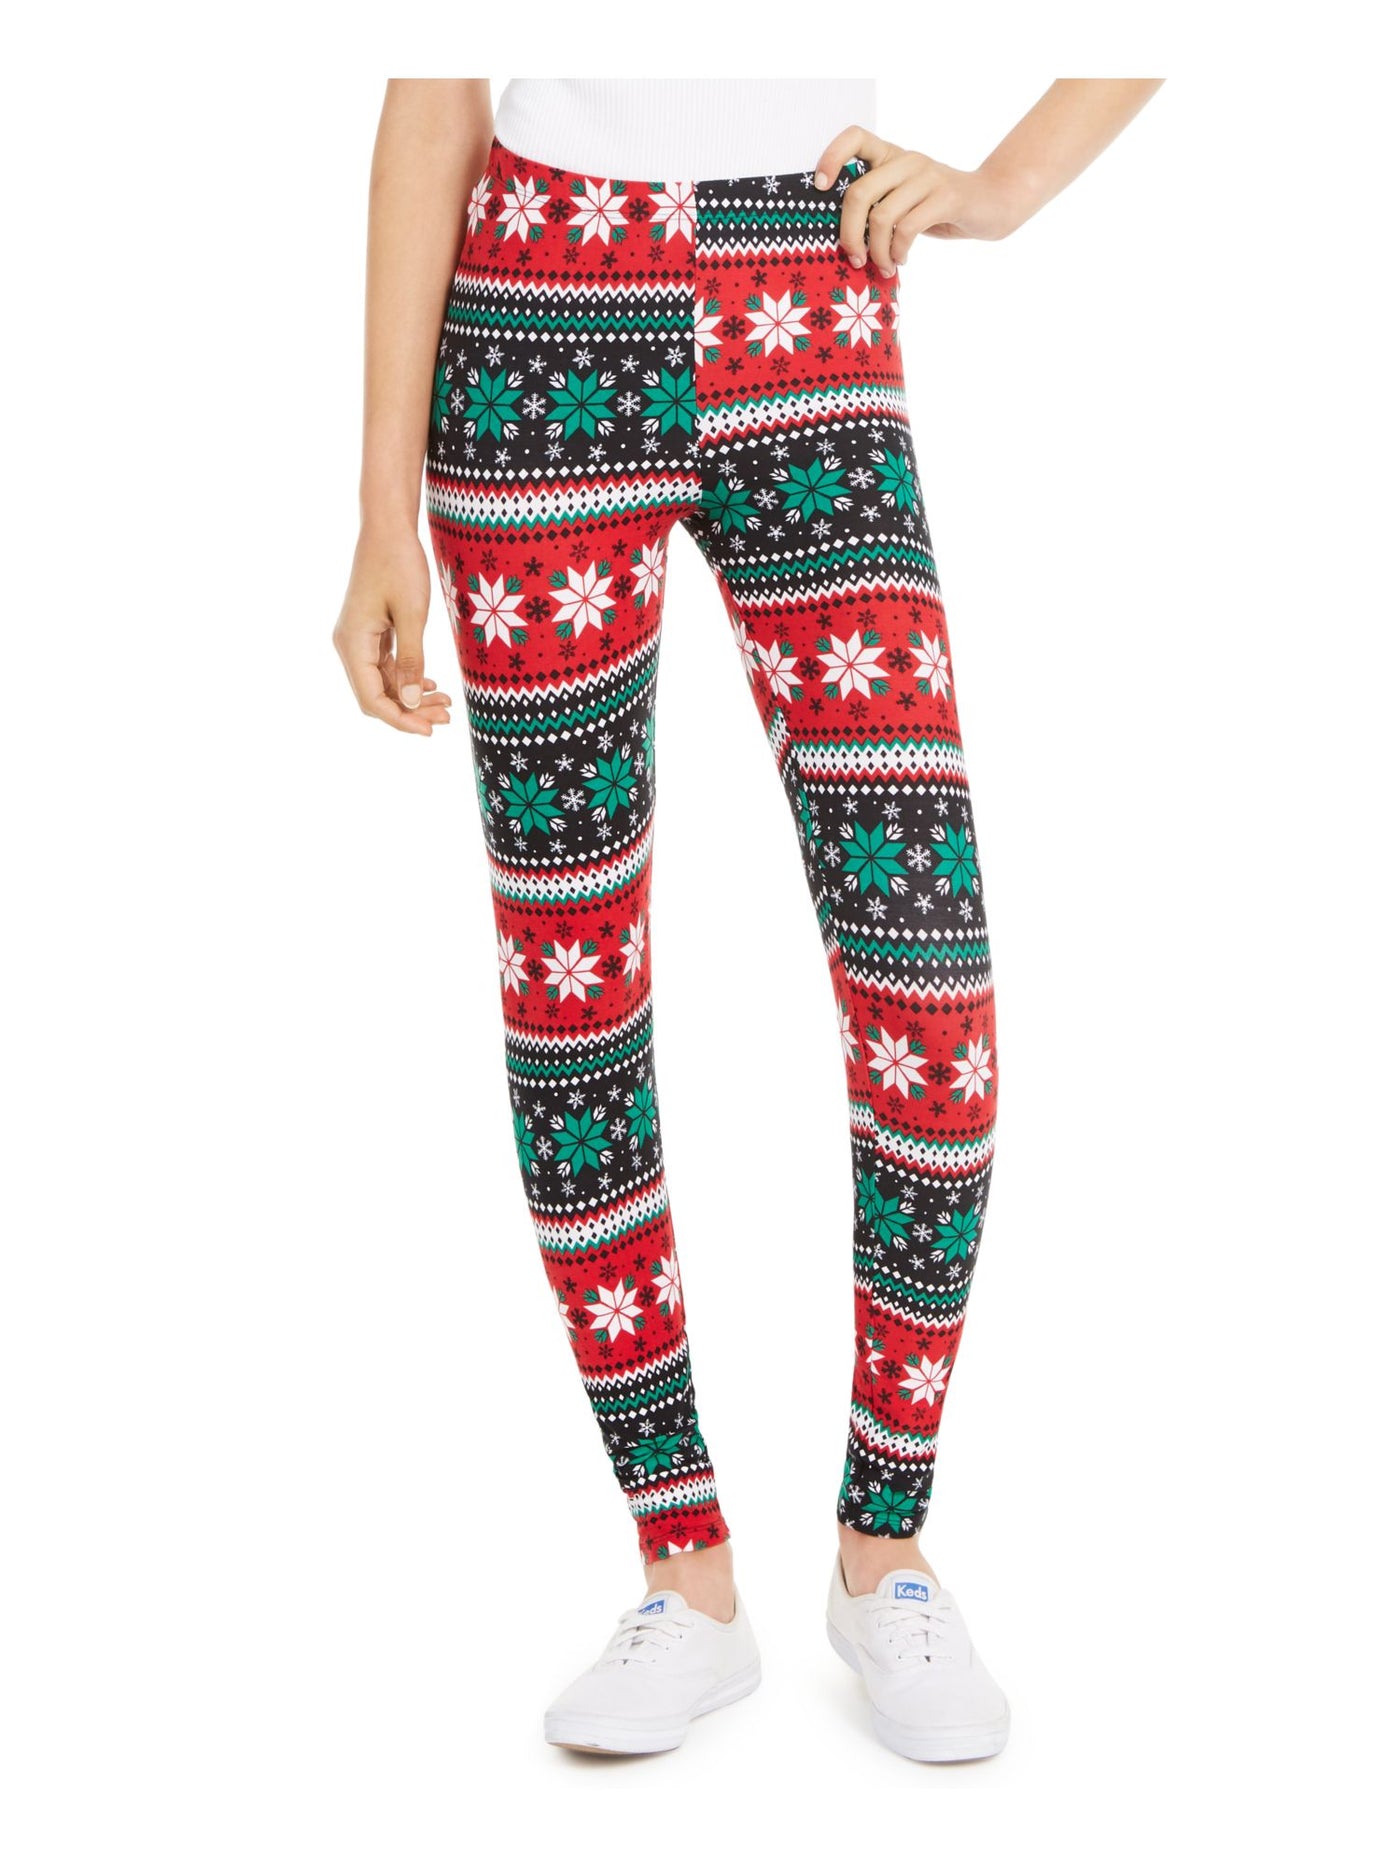 PLANET GOLD Womens Red Printed Holiday Leggings Juniors Size: S